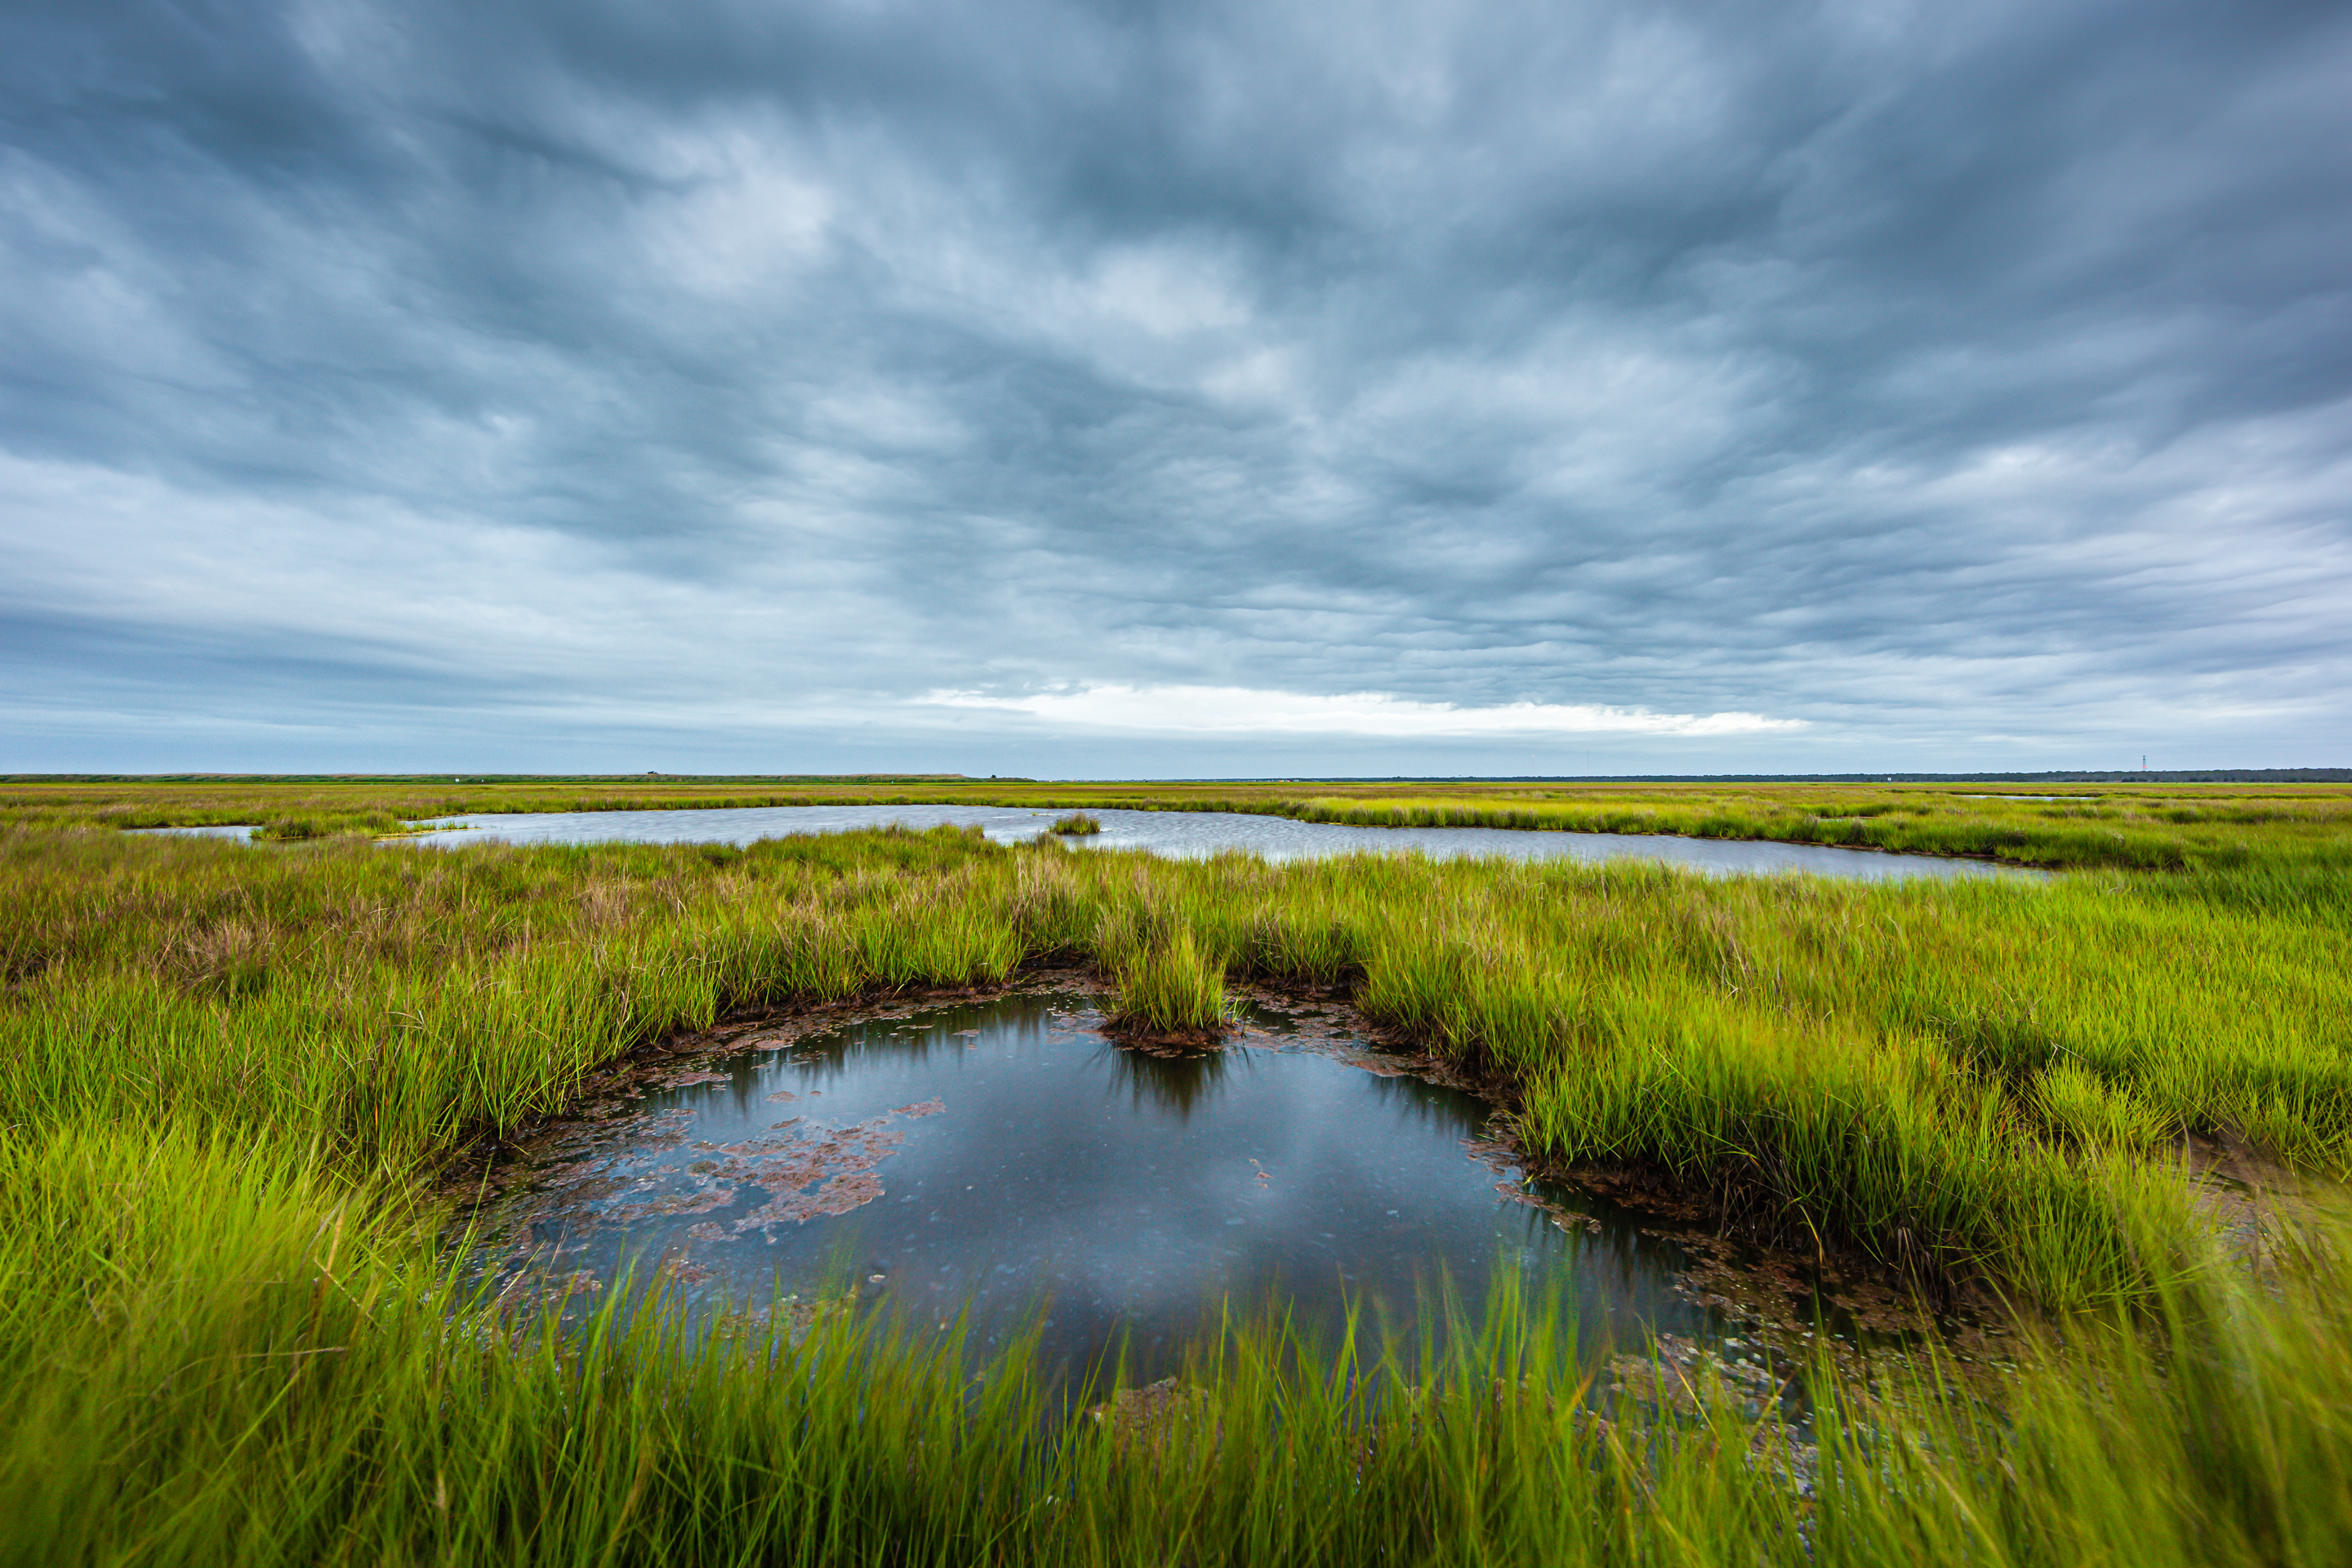 14mm wide angle landscape photo of wind swept salt marsh under cloudy gray skies.